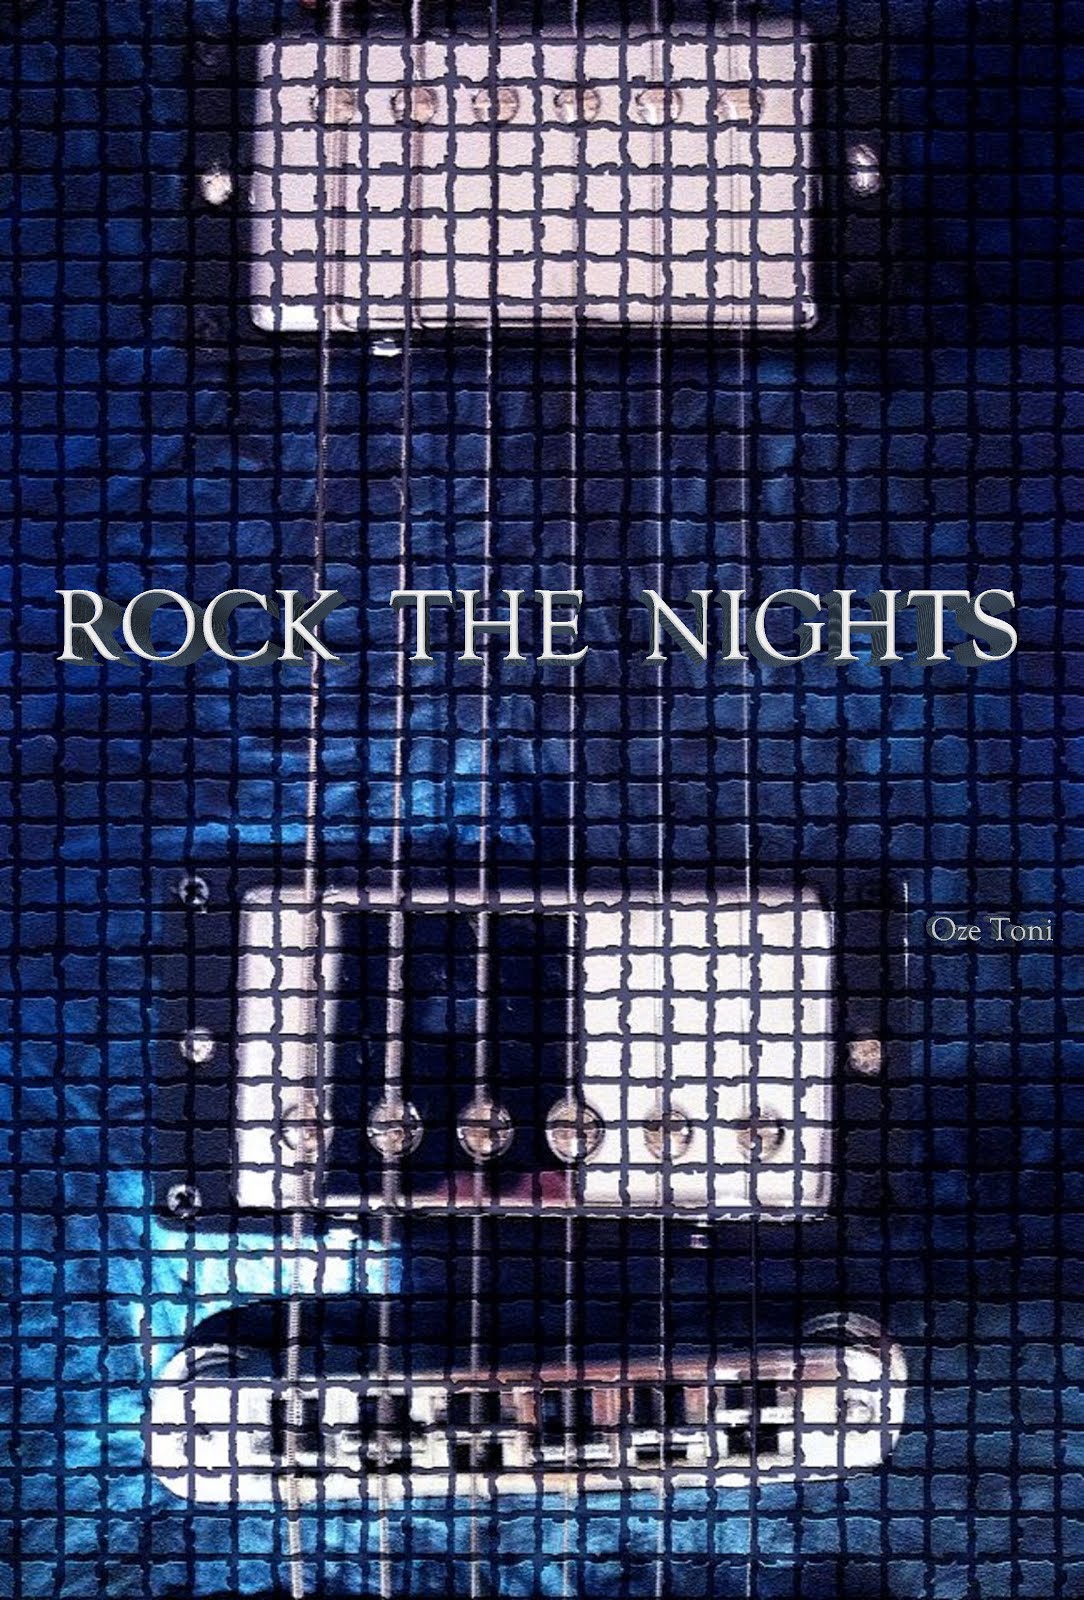 Click the image to visit Rock The Nights On Facebook